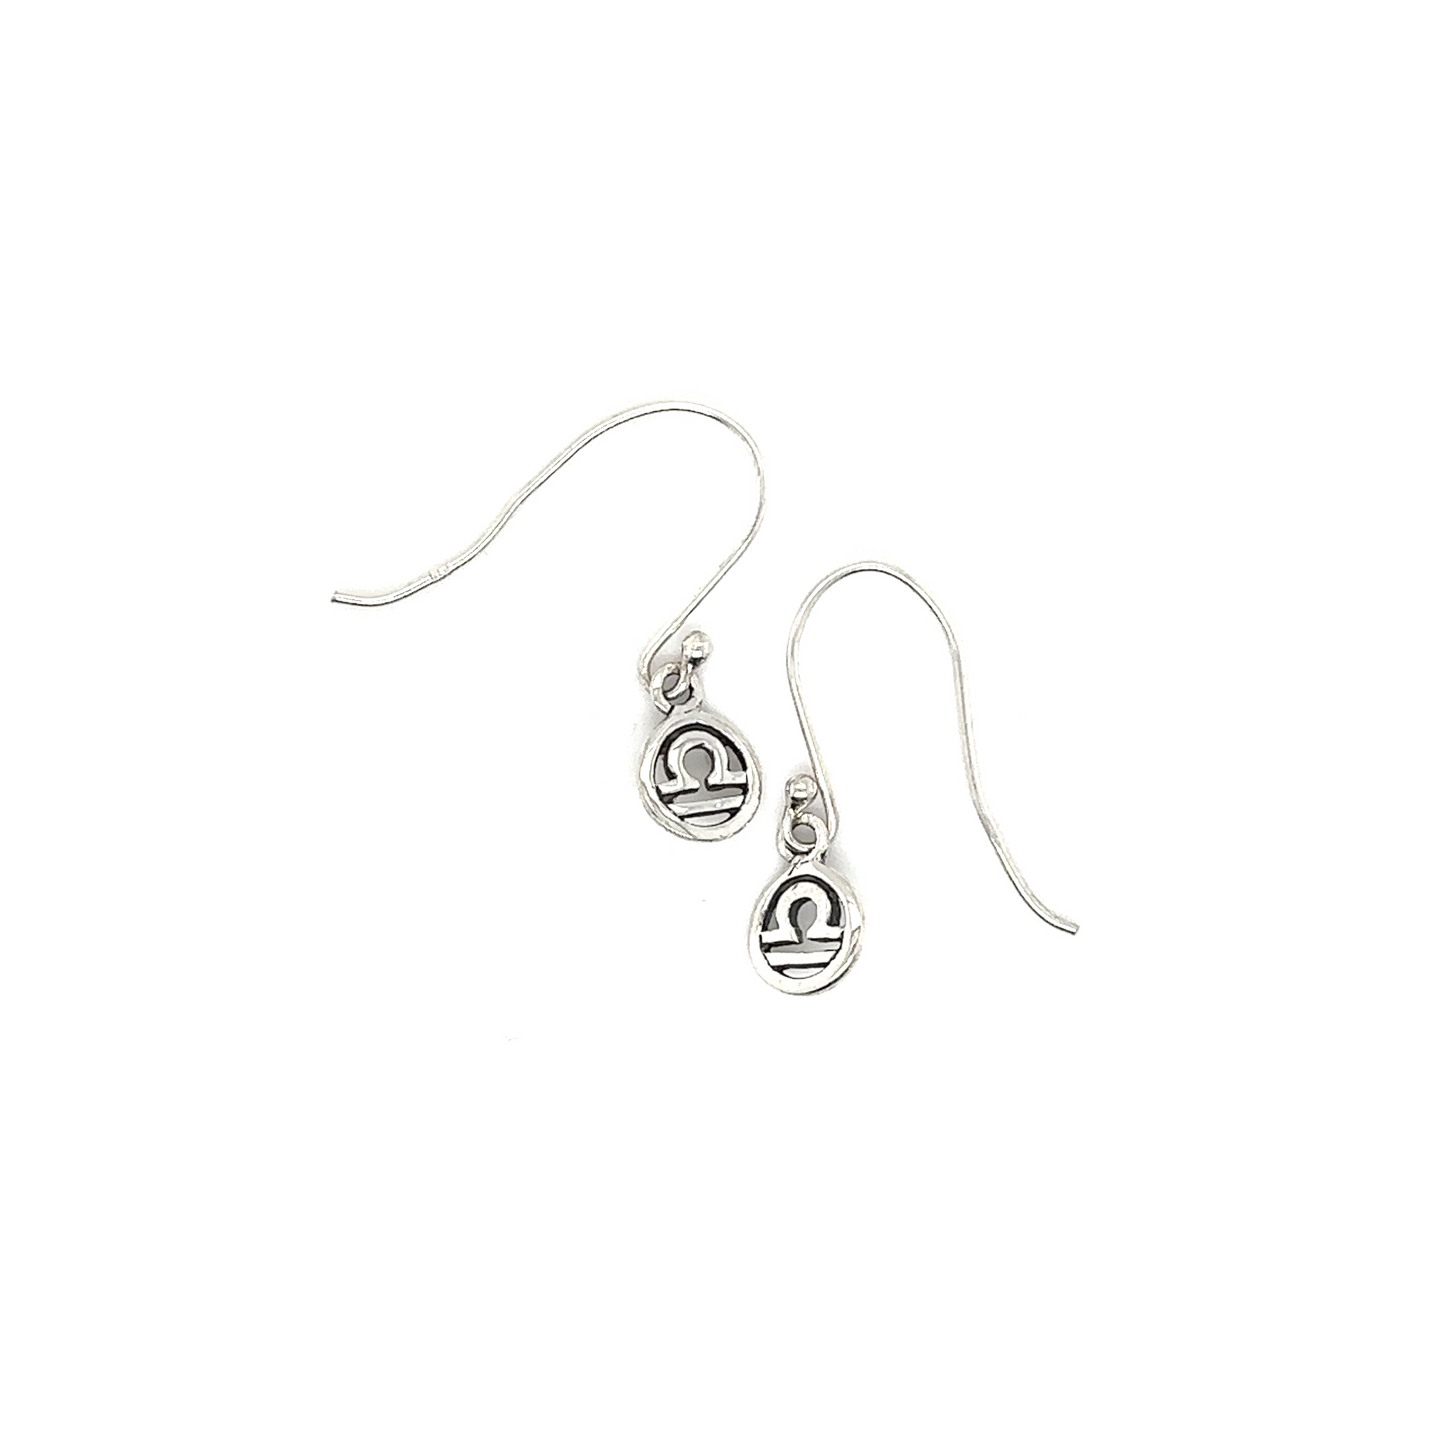 A pair of Super Silver Libra Zodiac Earrings, with a small circle, inspired by the Libra zodiac symbol.